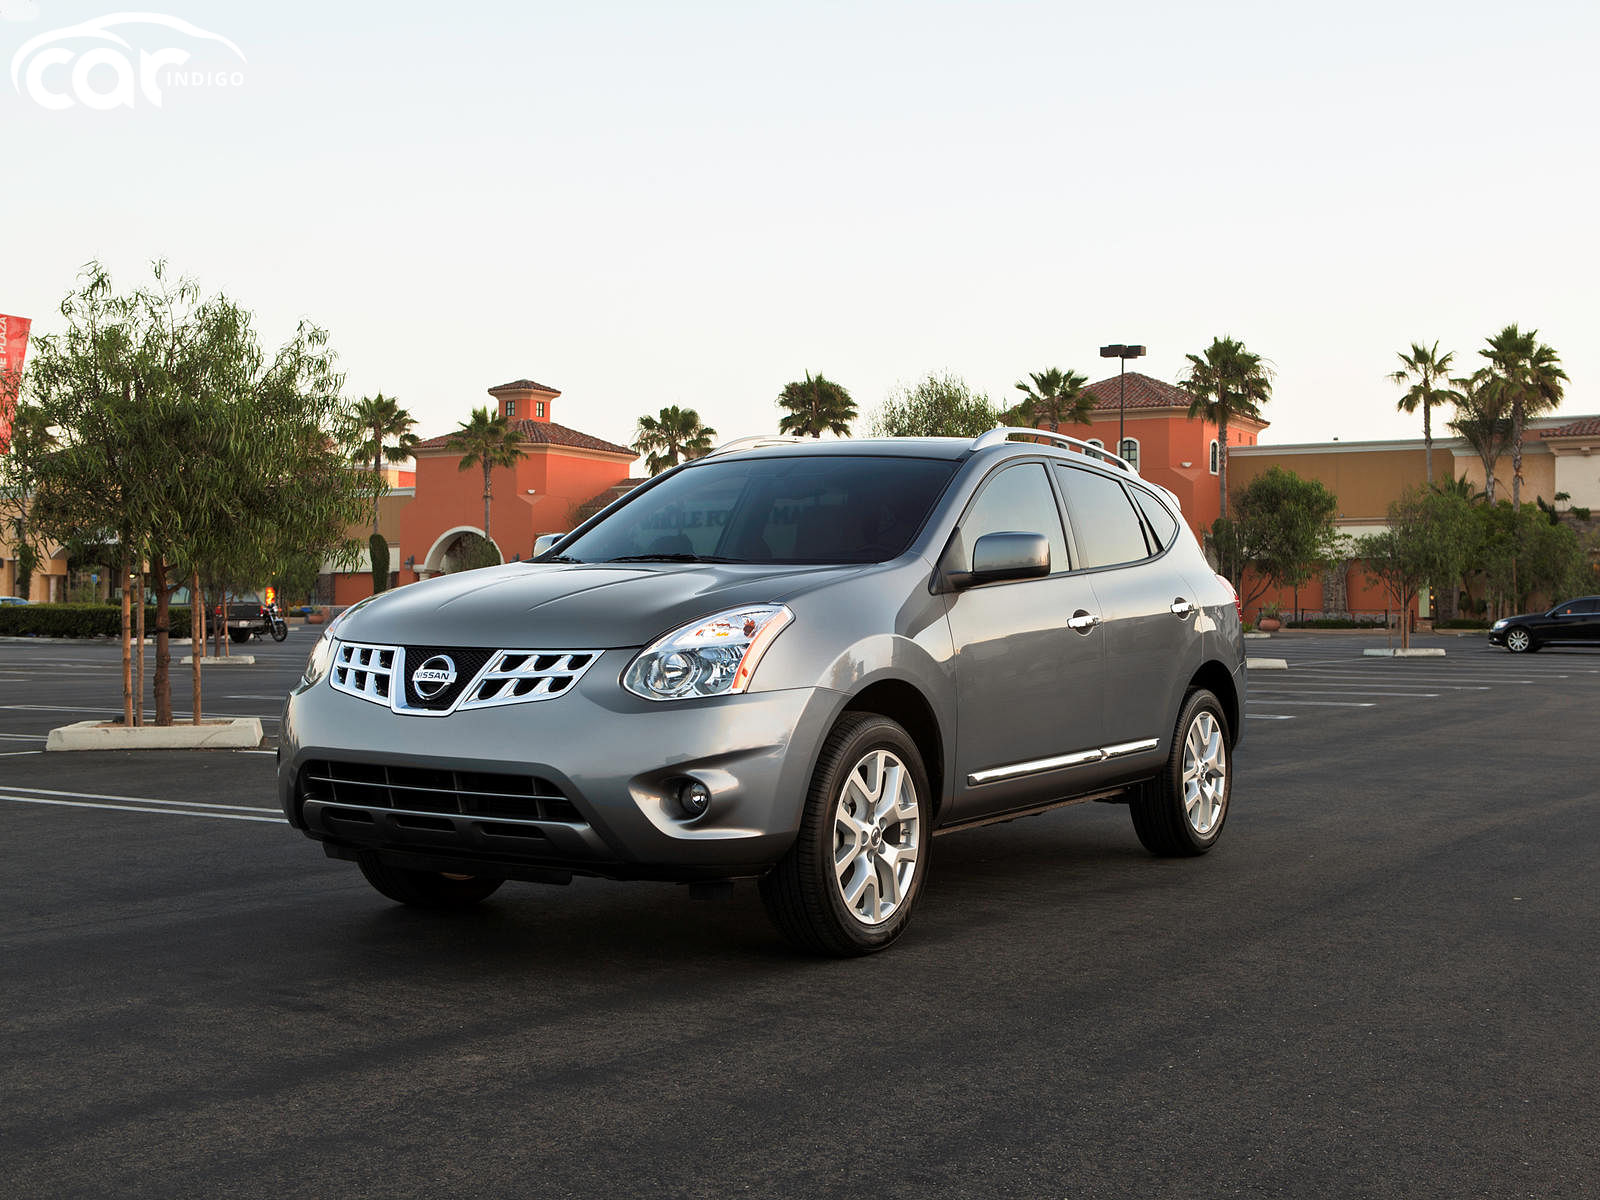 2013 nissan rogue reliability